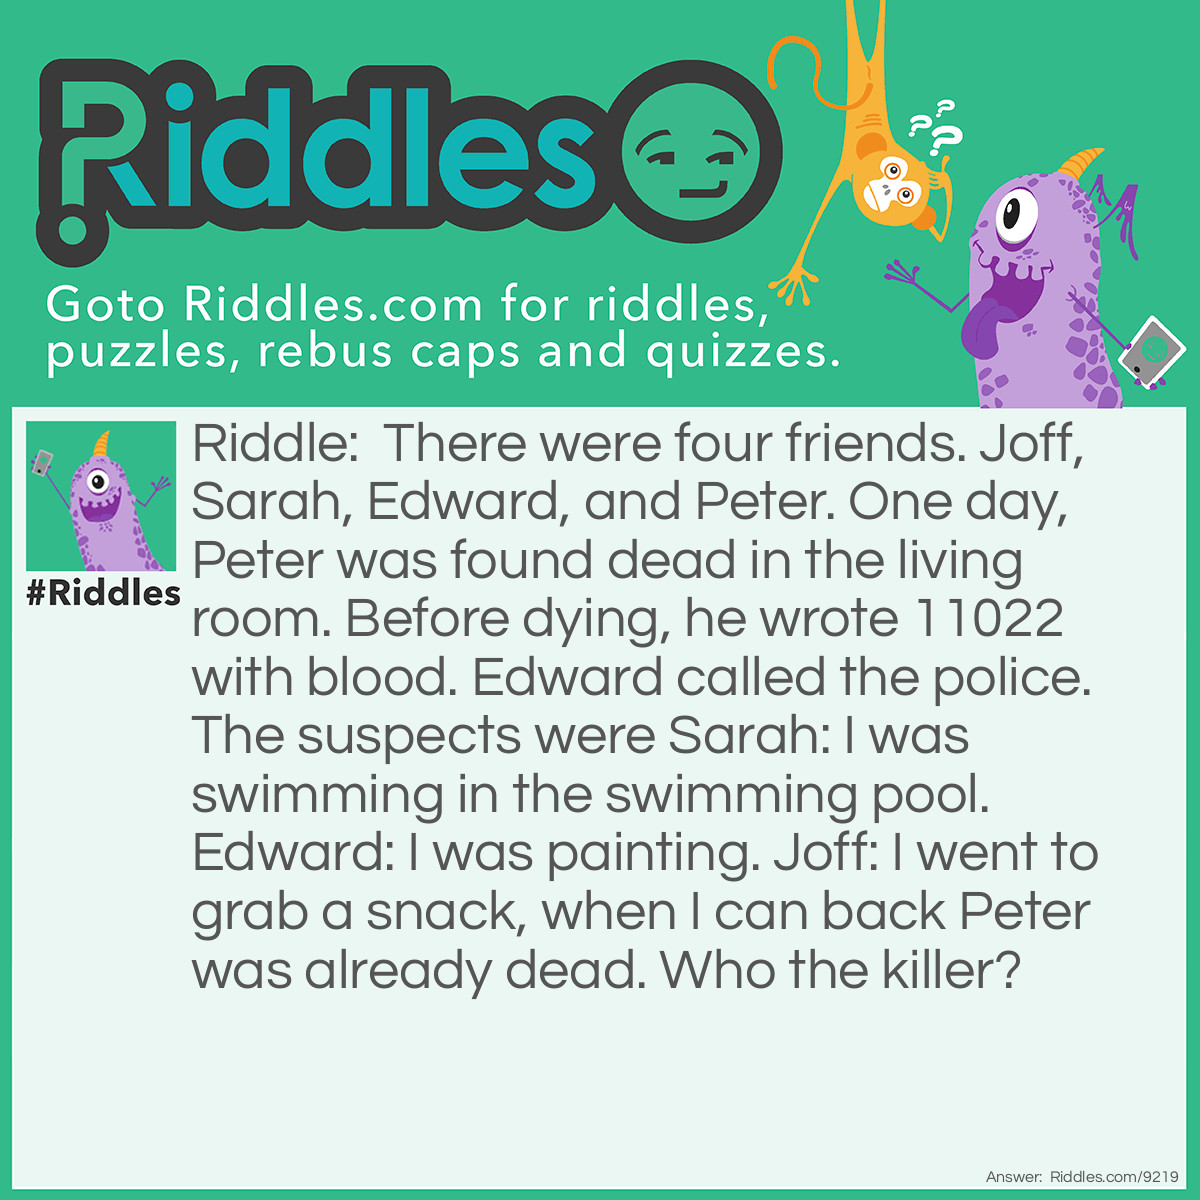 Riddle: There were four friends. Joff, Sarah, Edward, and Peter. One day, Peter was found dead in the living room. Before dying, he wrote 11022 with blood. Edward called the police. The suspects were Sarah: I was swimming in the swimming pool. Edward: I was painting. Joff: I went to grab a snack, when I can back Peter was already dead. Who the killer? Answer: It was Joff. 1:January 10:October 2: February 2:February Take the first letters and you get Joff